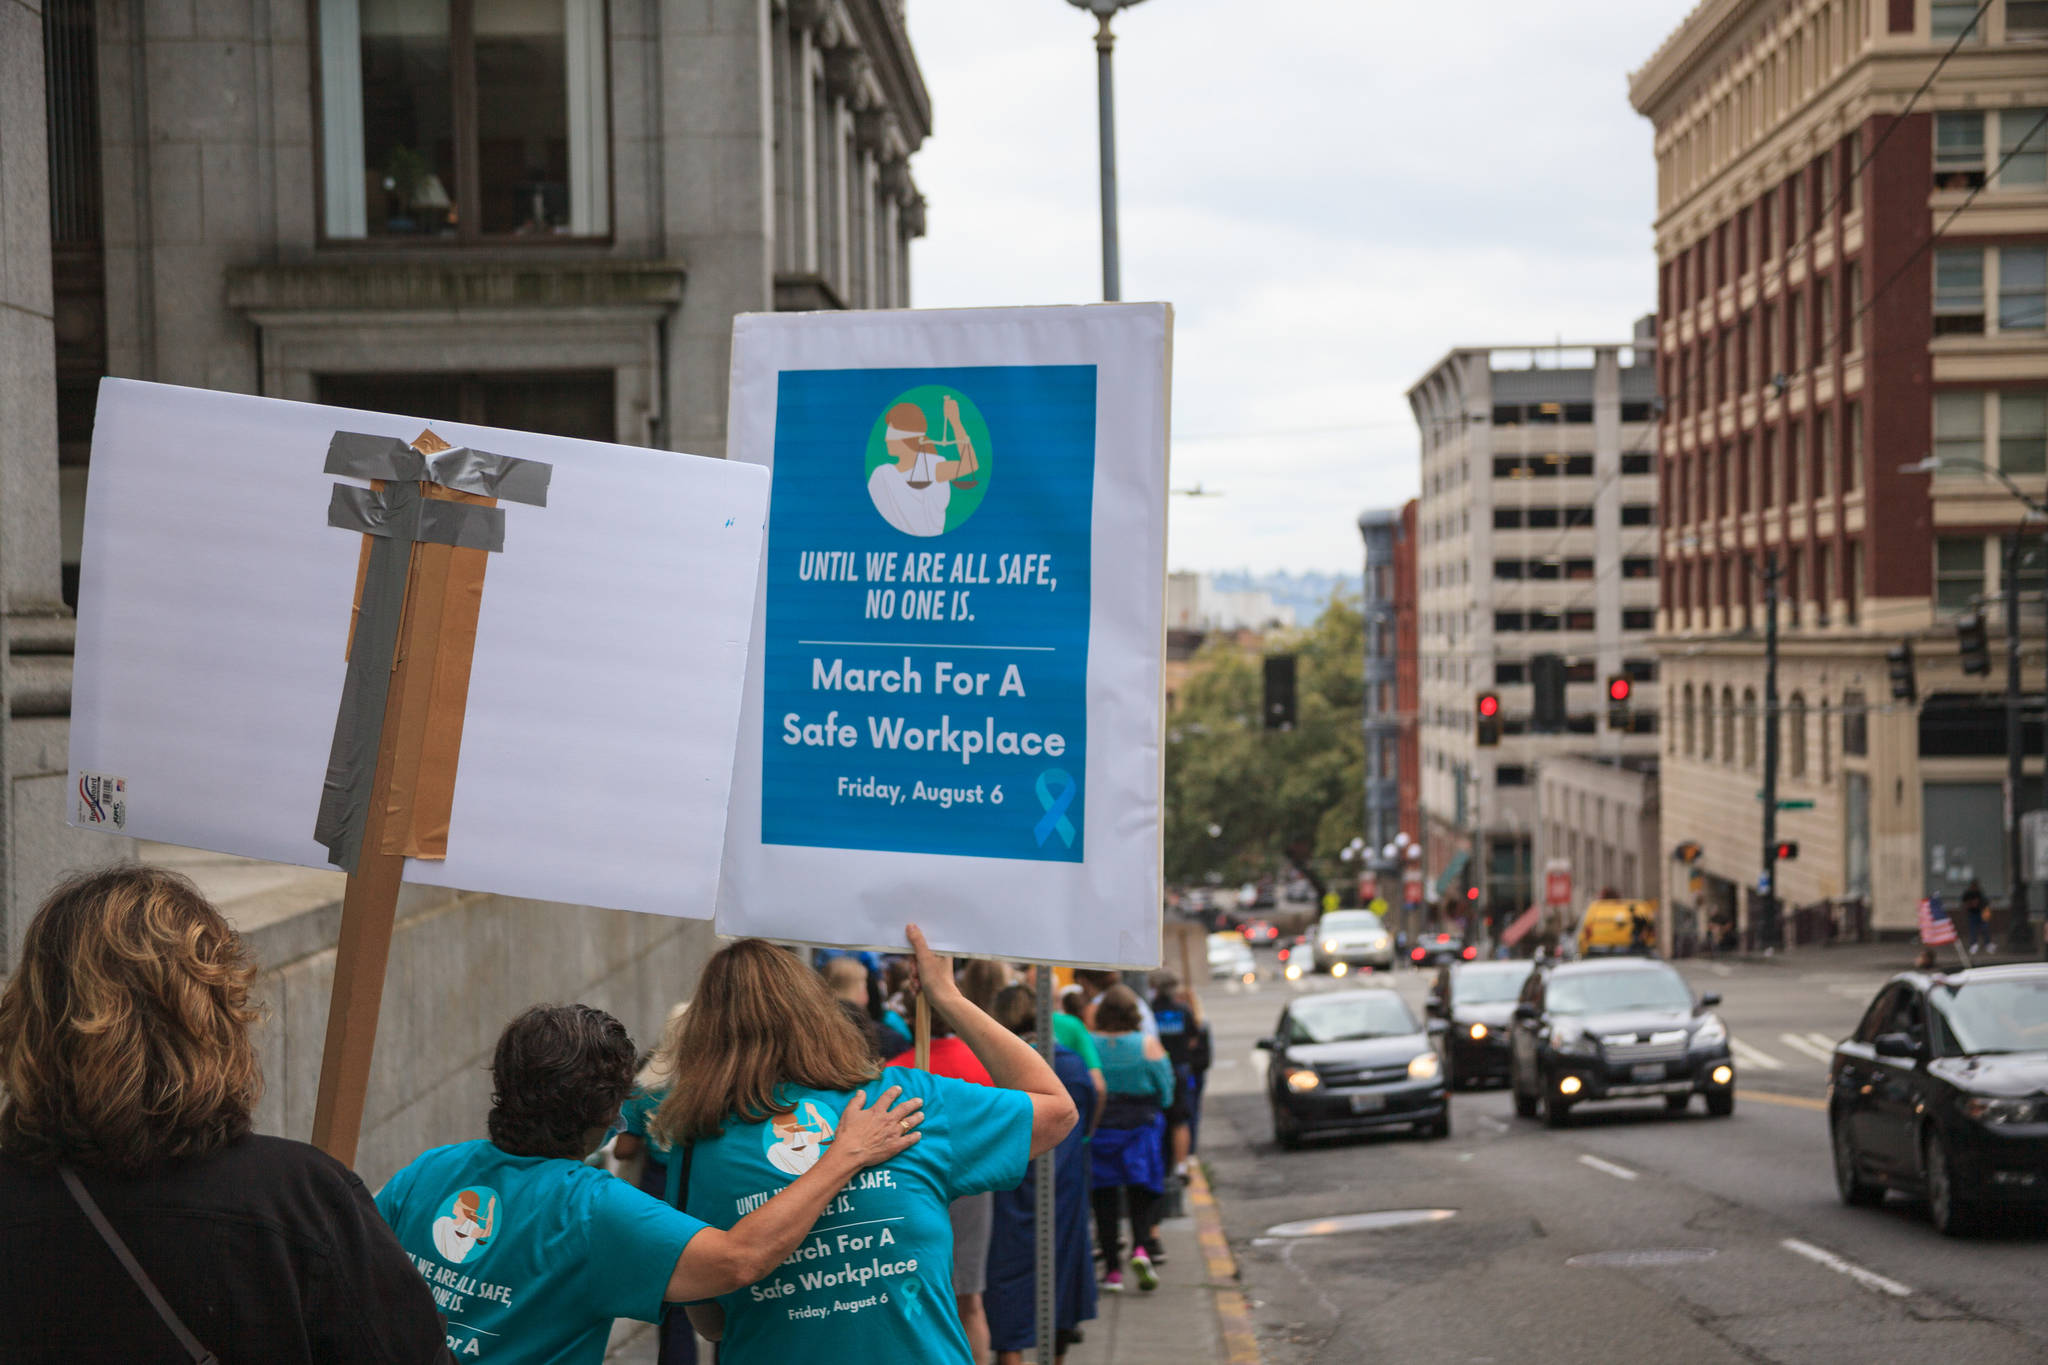 County employees and supporters walk around the block during a march for women’s safety at work in Seattle on Friday, Aug. 6, 2021. The march was scheduled after a woman was attacked in a bathroom at the King County Courthouse. Photo by Henry Stewart-Wood/Sound Publishing